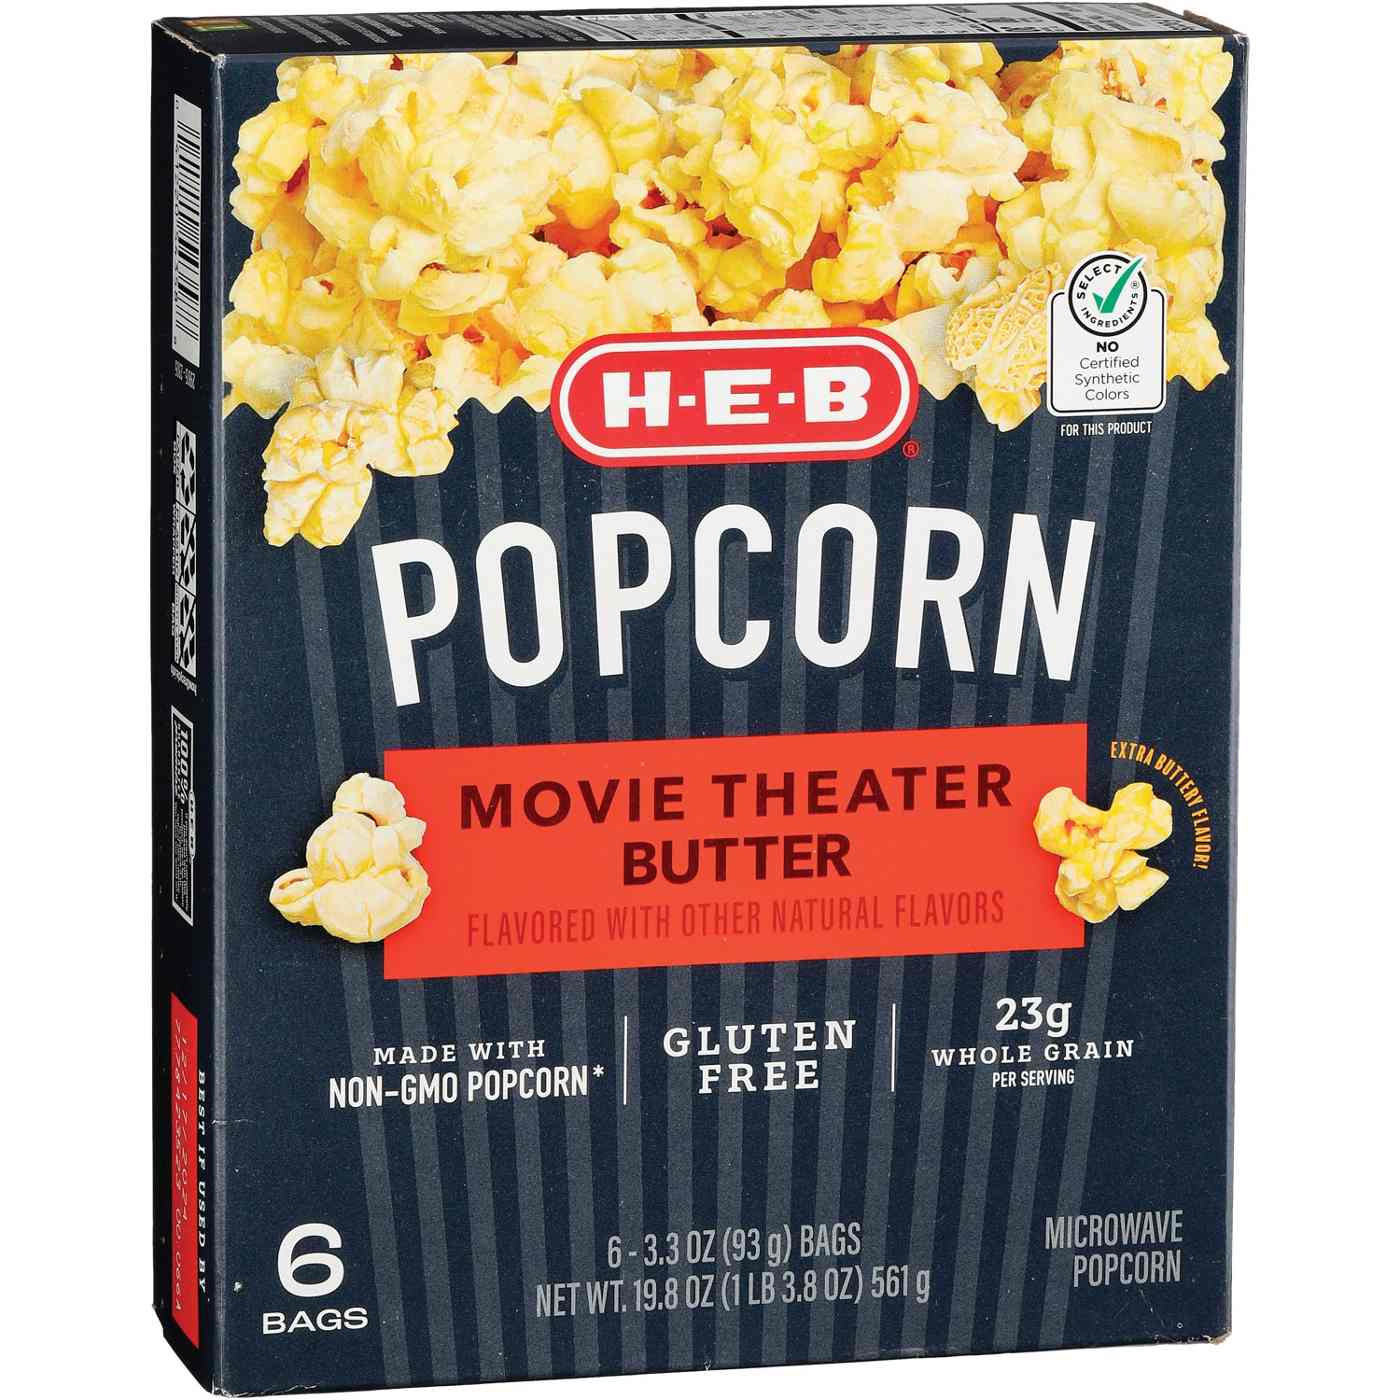 H-E-B Microwave Popcorn - Movie Theater Butter; image 2 of 2